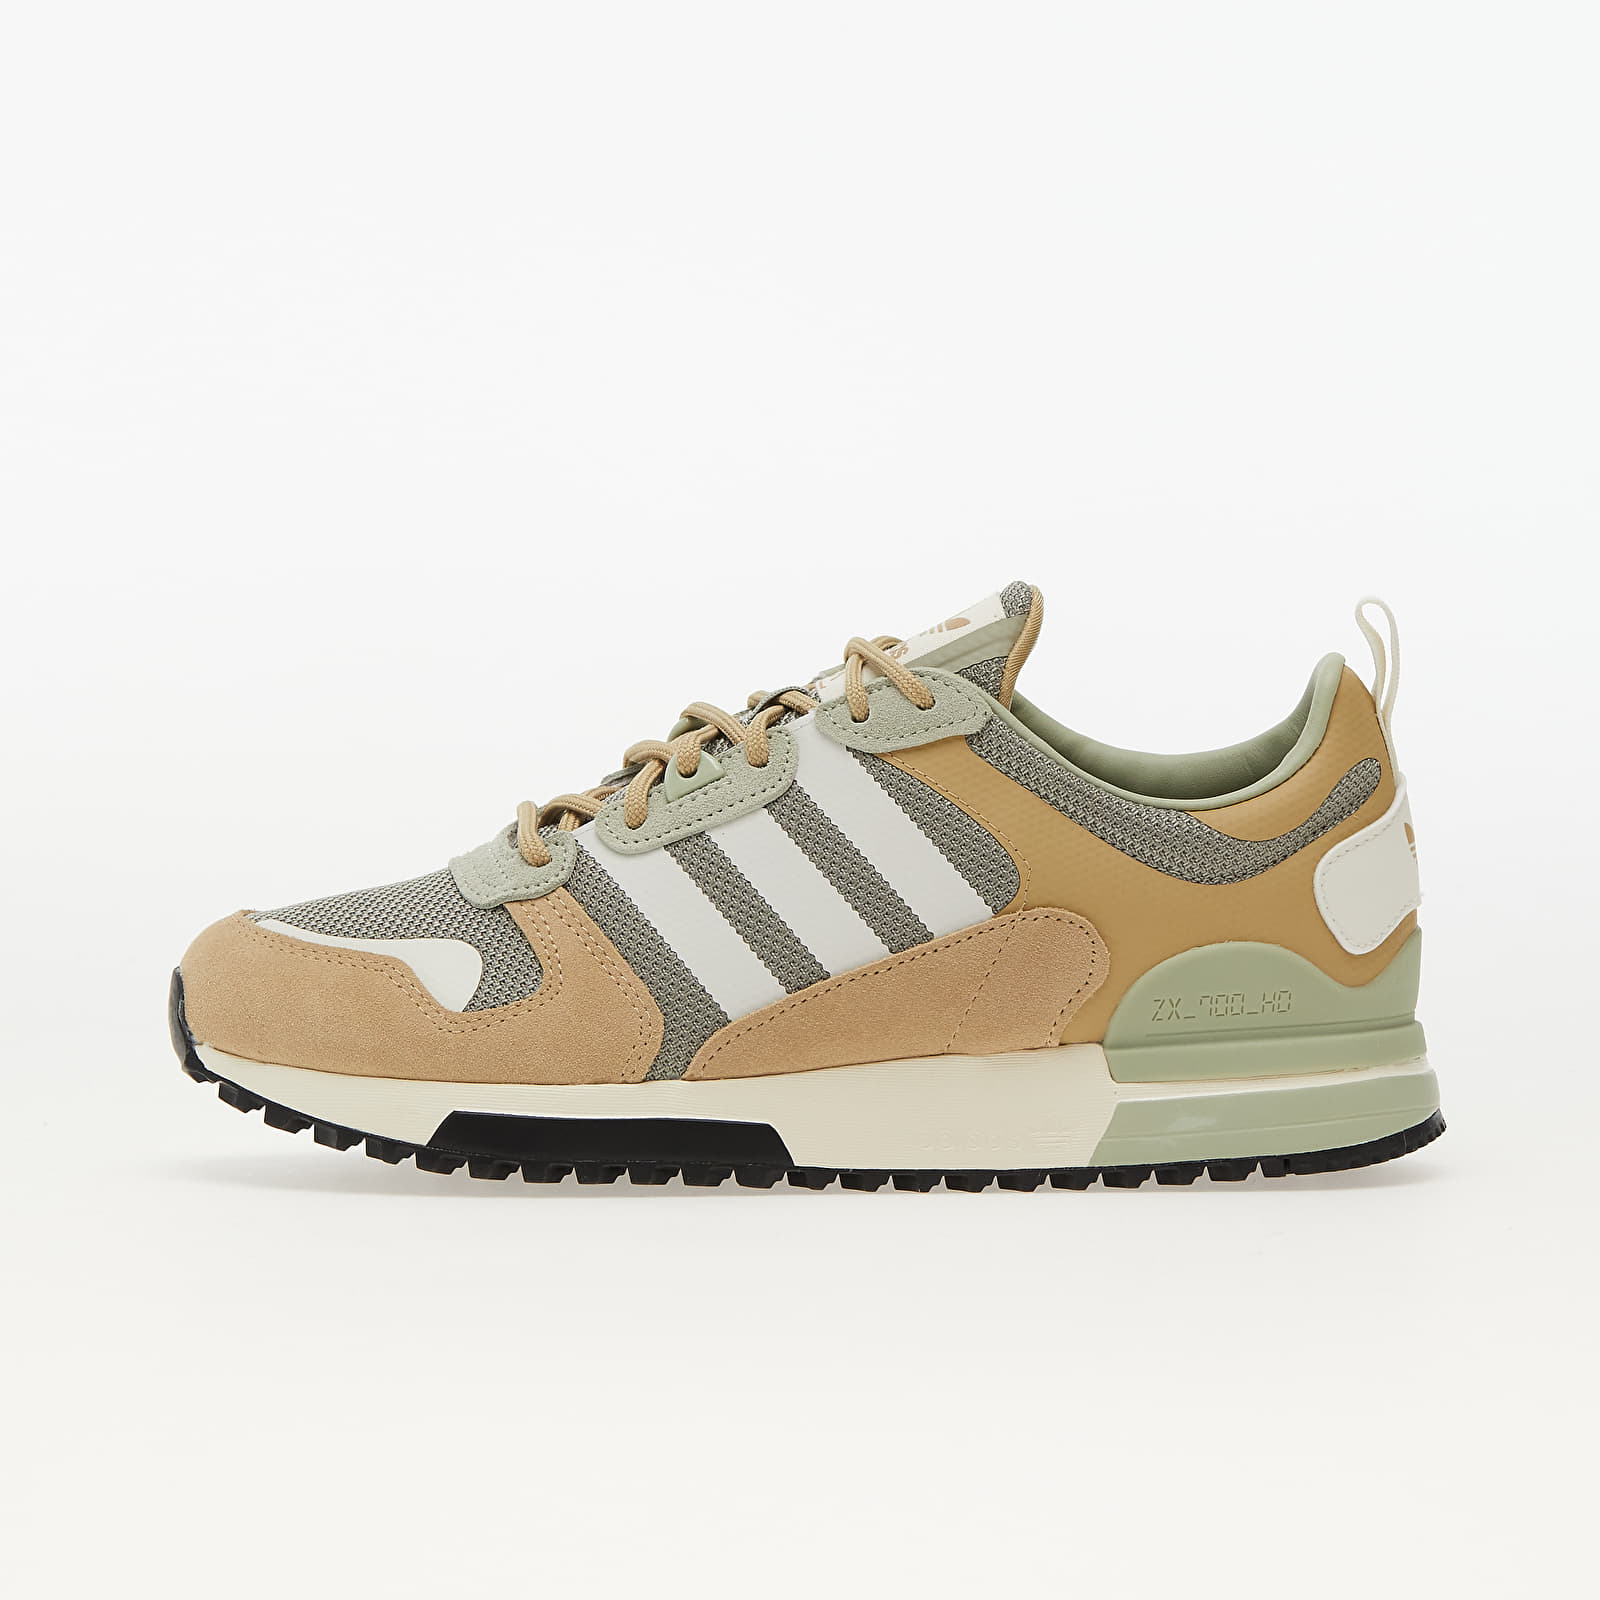 Men's shoes adidas ZX 700 HD Beige Tone/ Off White/ Feather Grey